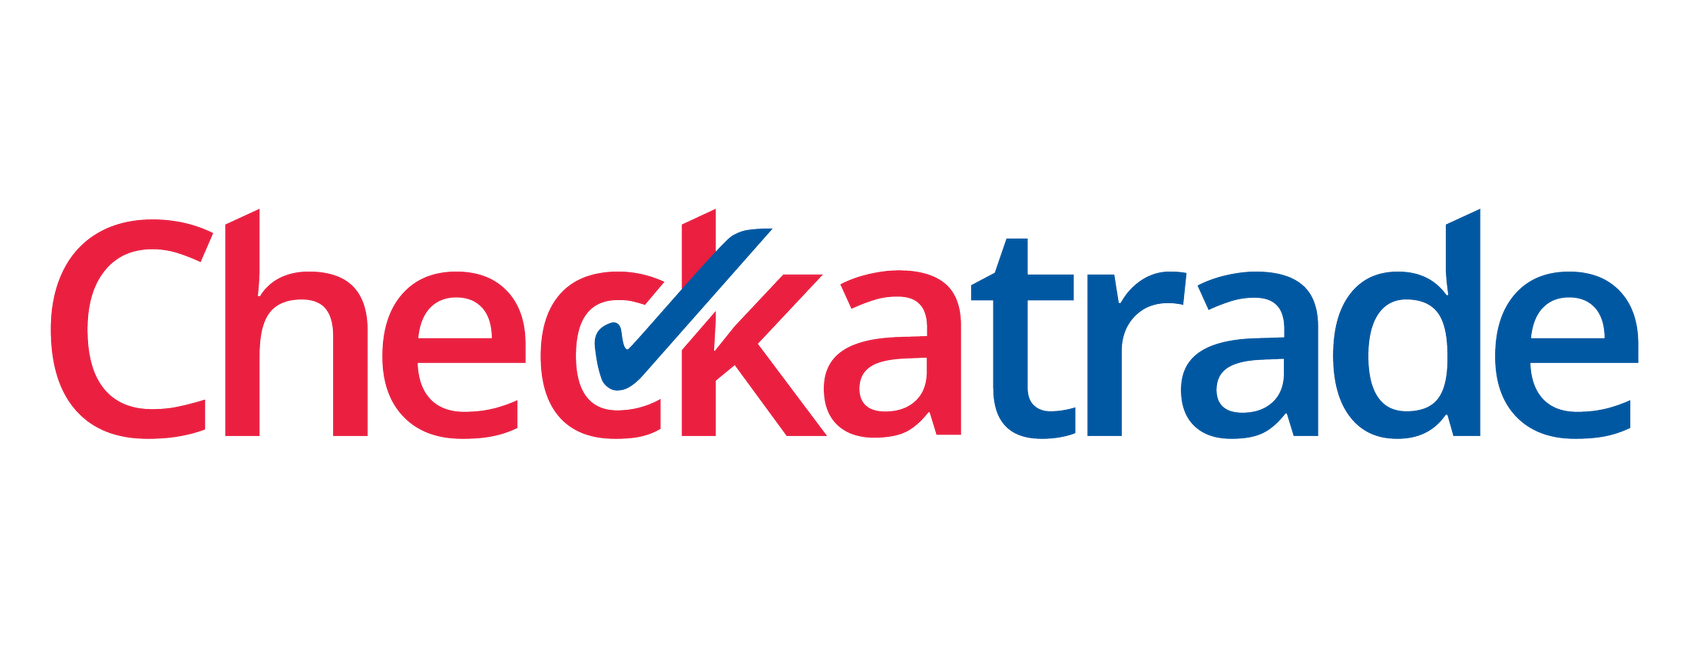 the checkatrade logo is red and blue on a white background .